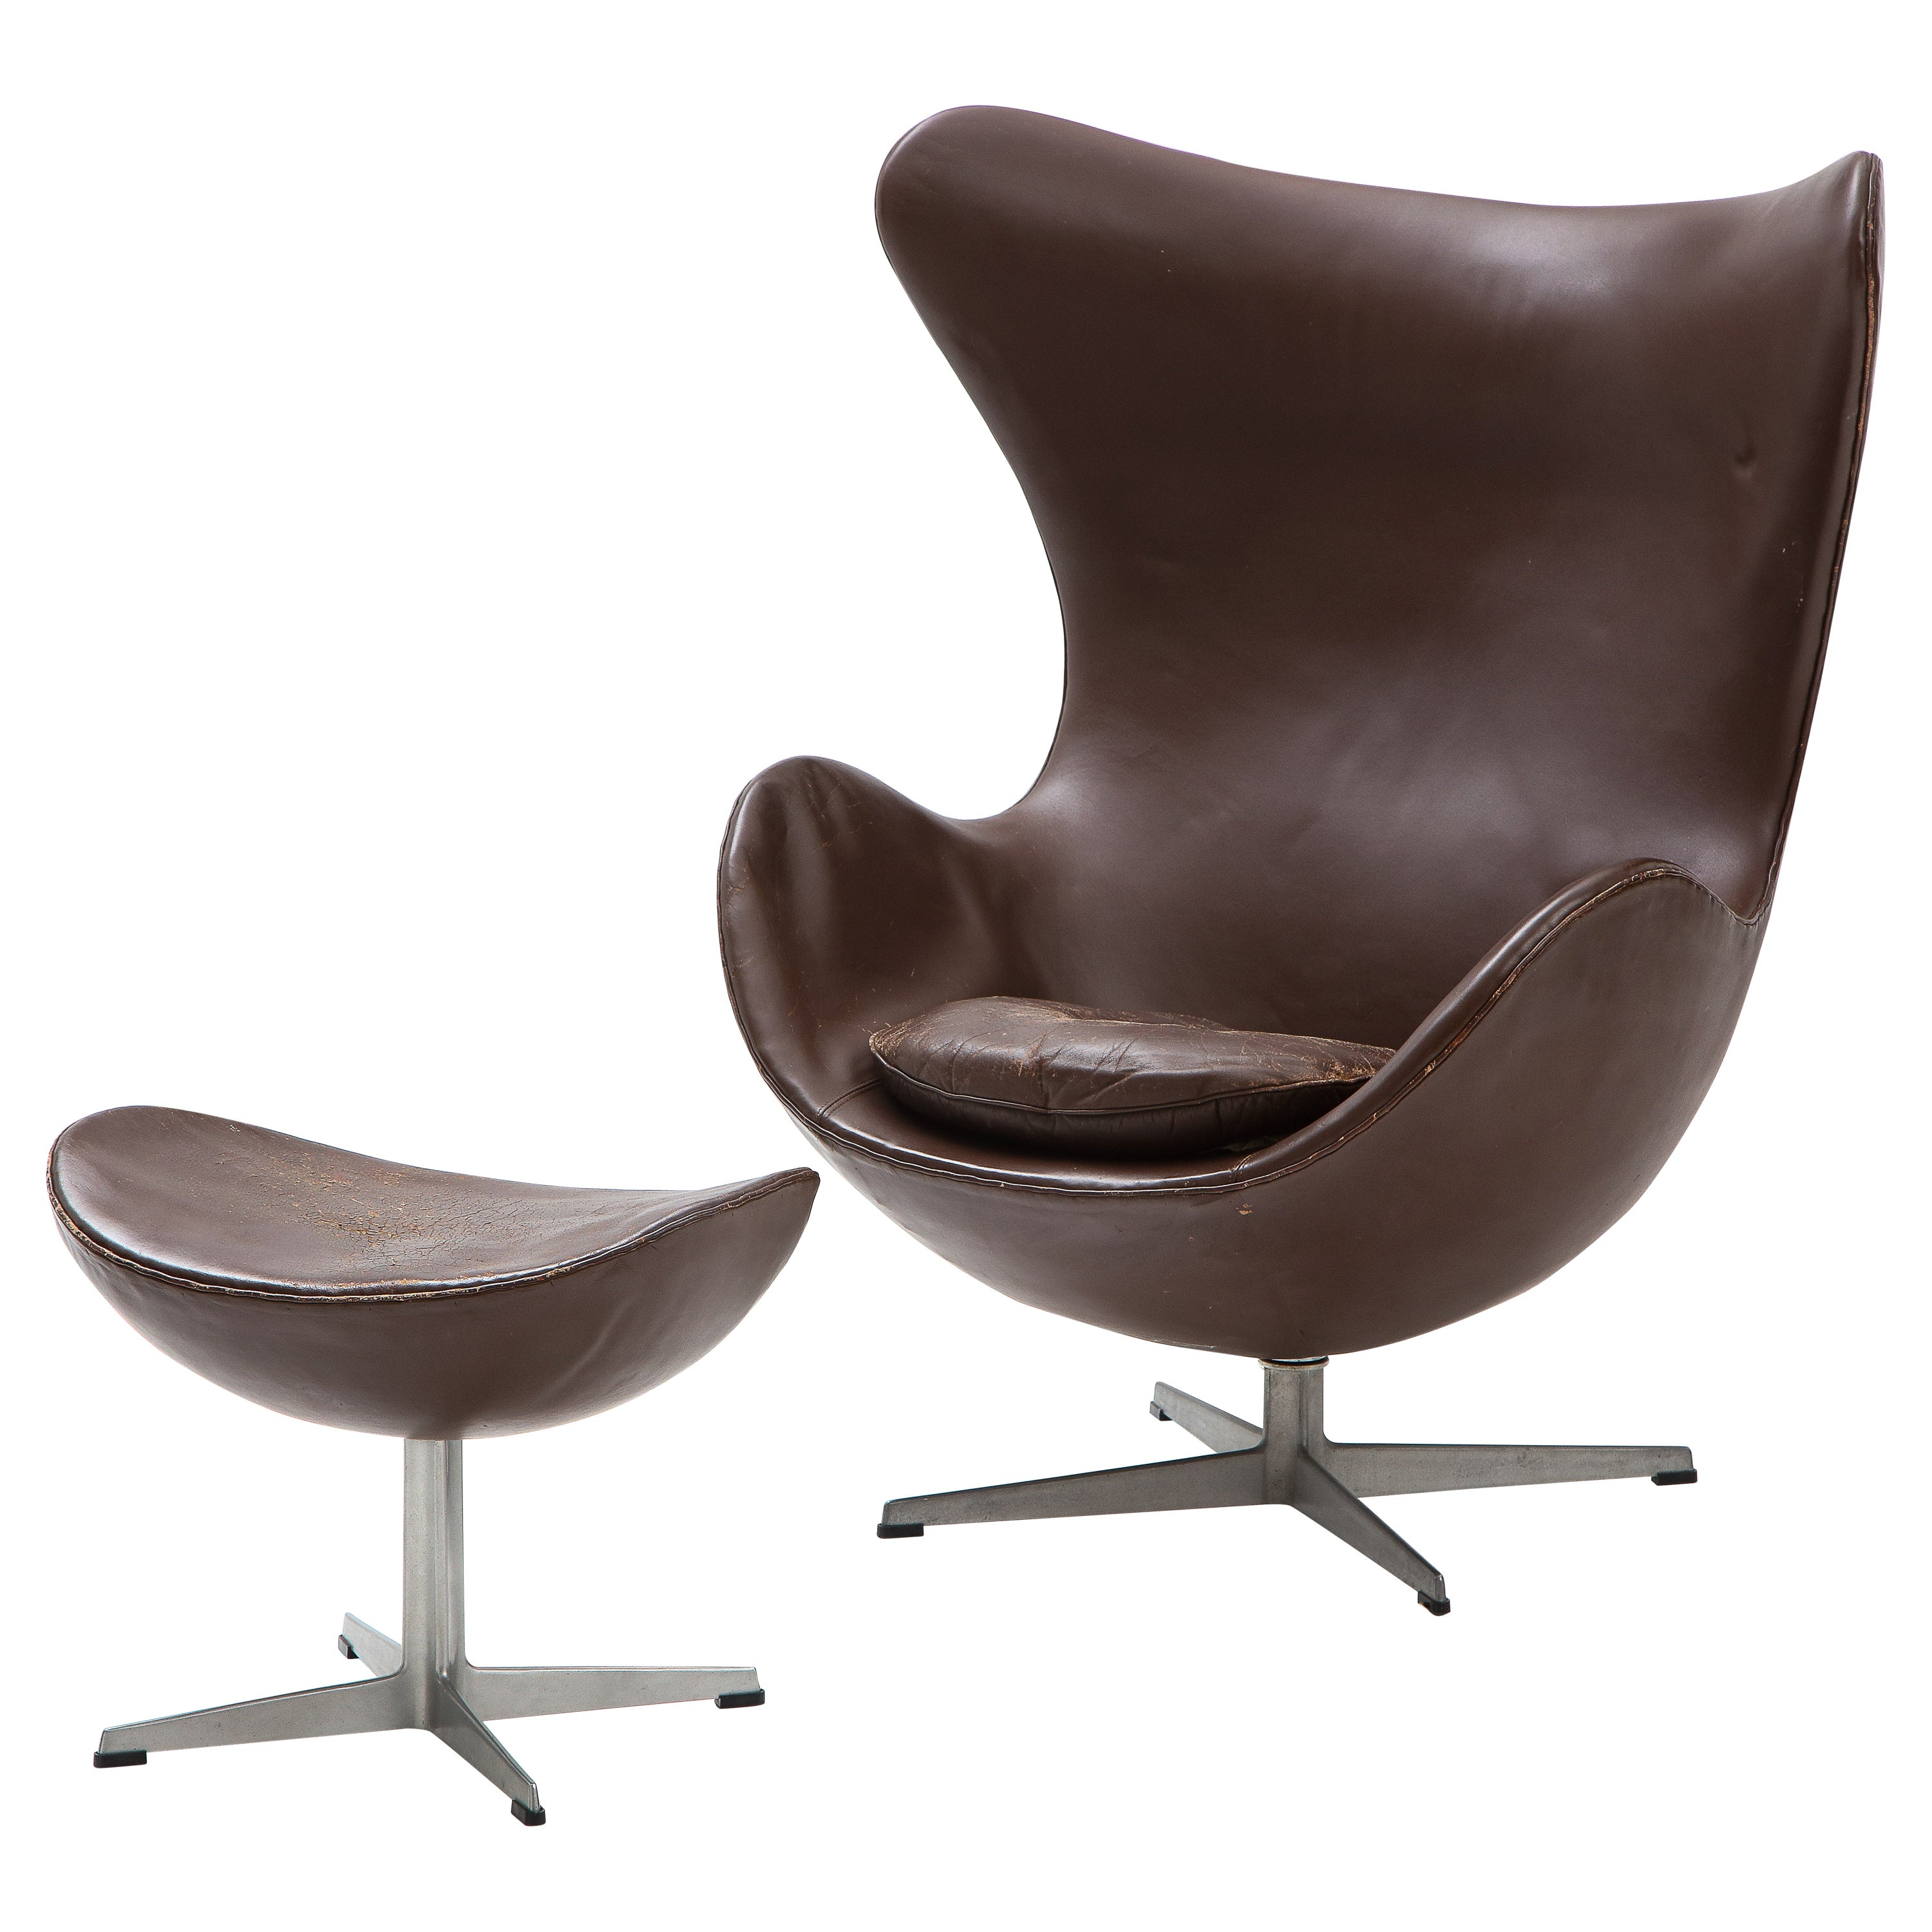 Arne Jacobson 'Egg' Chair and Ottoman, Original Leather for Fritz Hansen, 1976